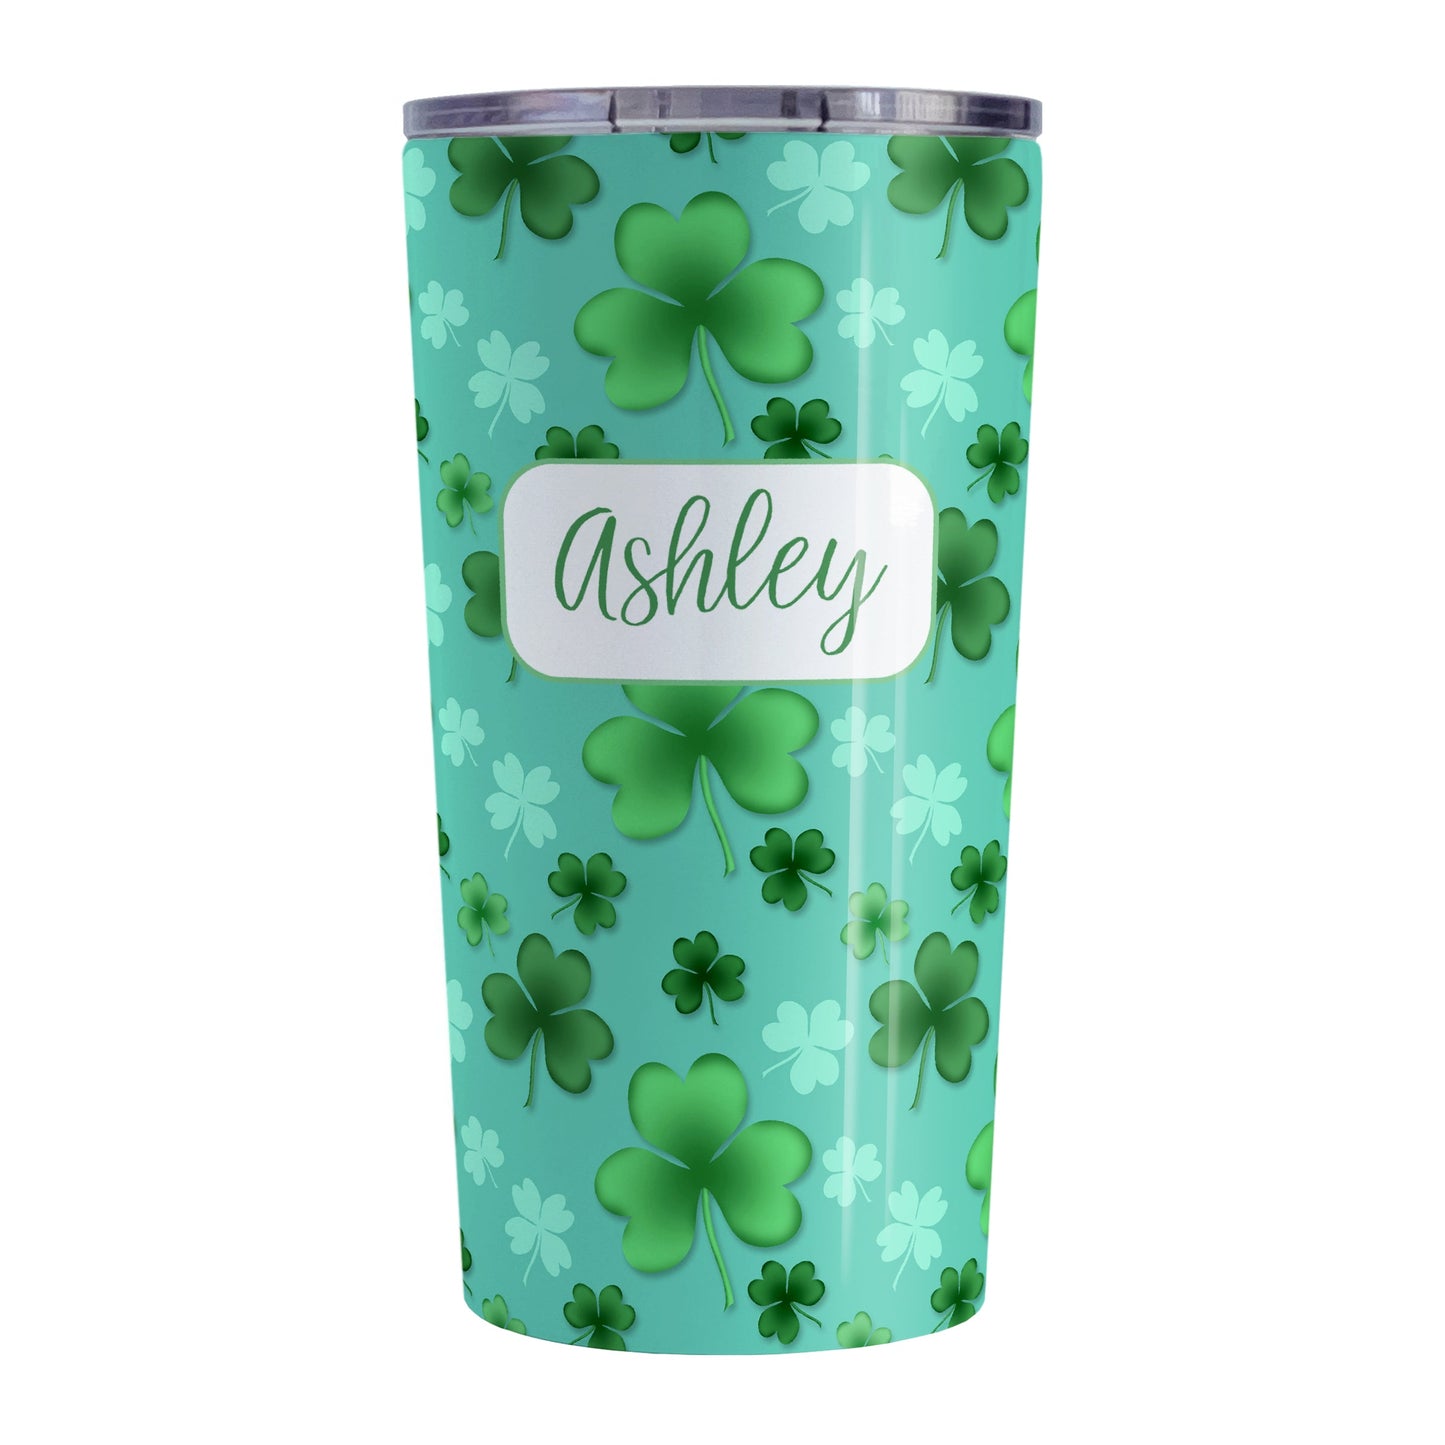 Personalized Lucky Clover Pattern Teal and Green Tumbler Cup (20oz, stainless steel insulated) at Amy's Coffee Mugs. A tumbler cup designed with a lucky green clover pattern with a 4-leaf clover among 3-leaf clovers, in different shades of green, over a teal background that wraps around the cup. Your name is personalized in green on white, over the lucky clover pattern.